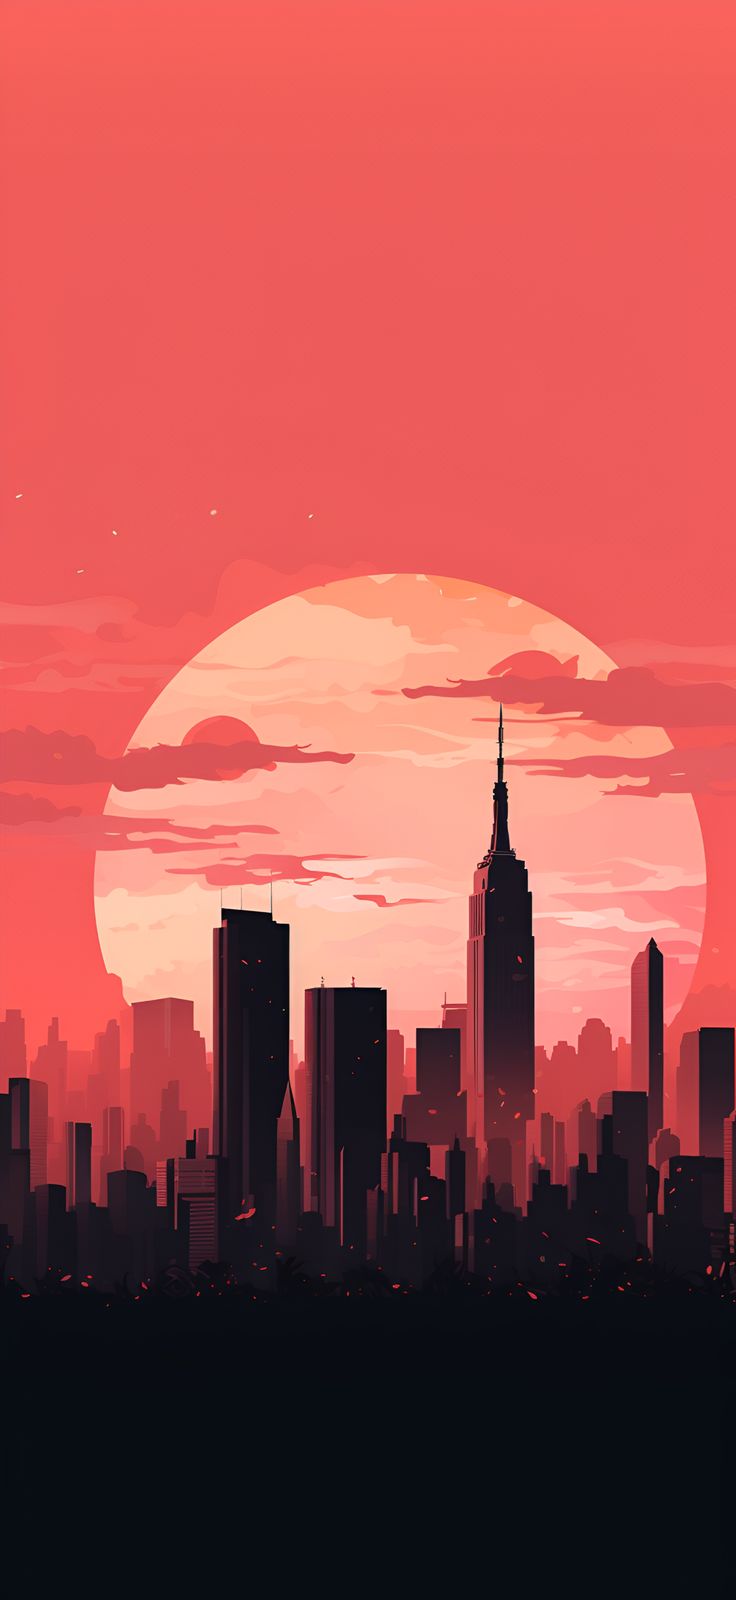 A beautiful sunset over a cityscape with skyscrapers - New York